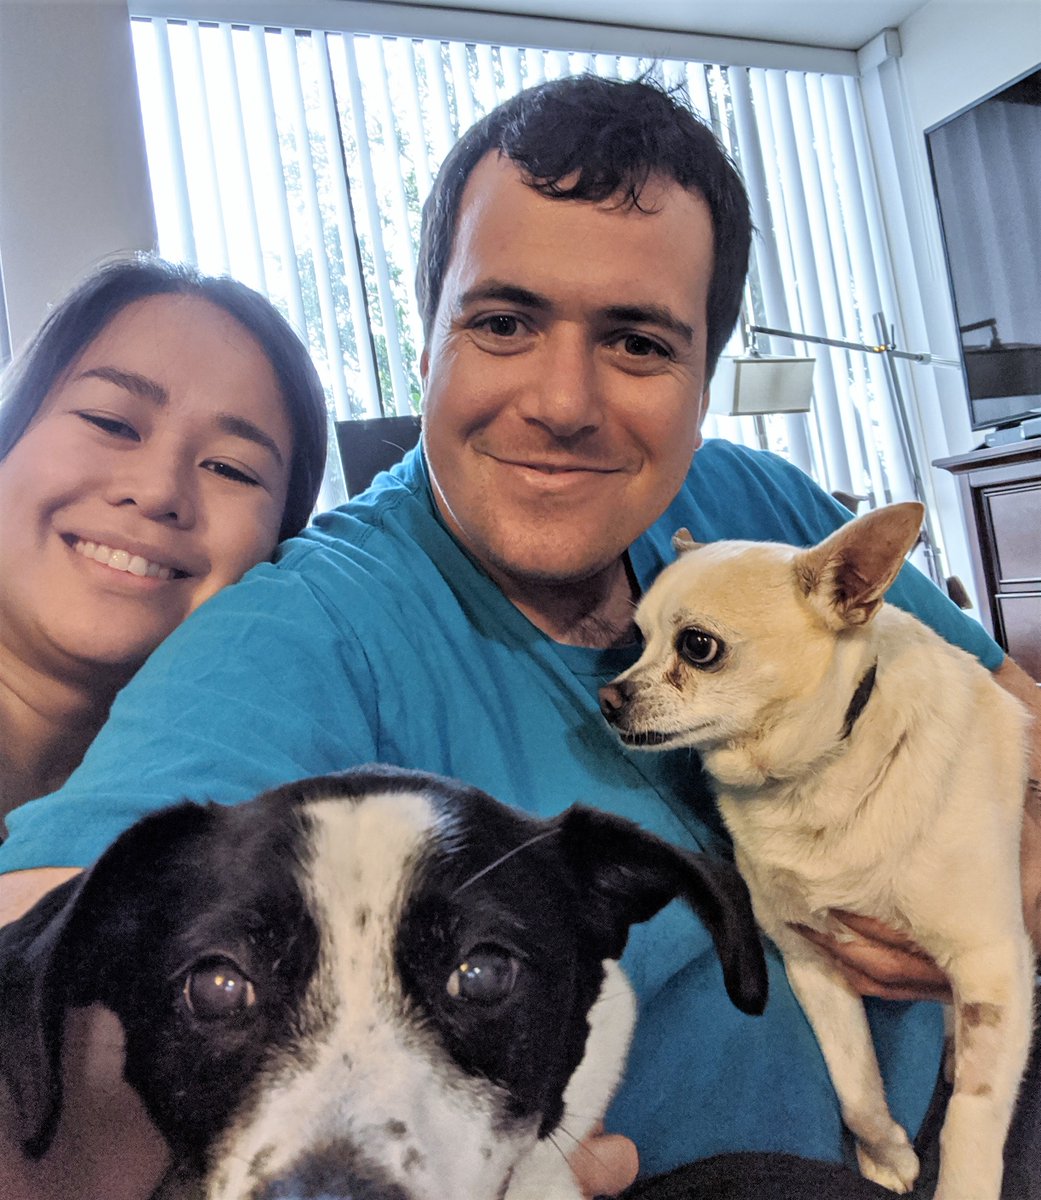 Mr. Papas, the #Chihuahua, is in his #ForeverHome. North Beach is his new hangout with dog bro Jake, (hamming it up) and parents Khrizel & Forest! They wanted to expand their family with a friendly and quiet dog and Mr. Papas raised his paw! 🐾 #adoptionsuccess #seniordogsrule